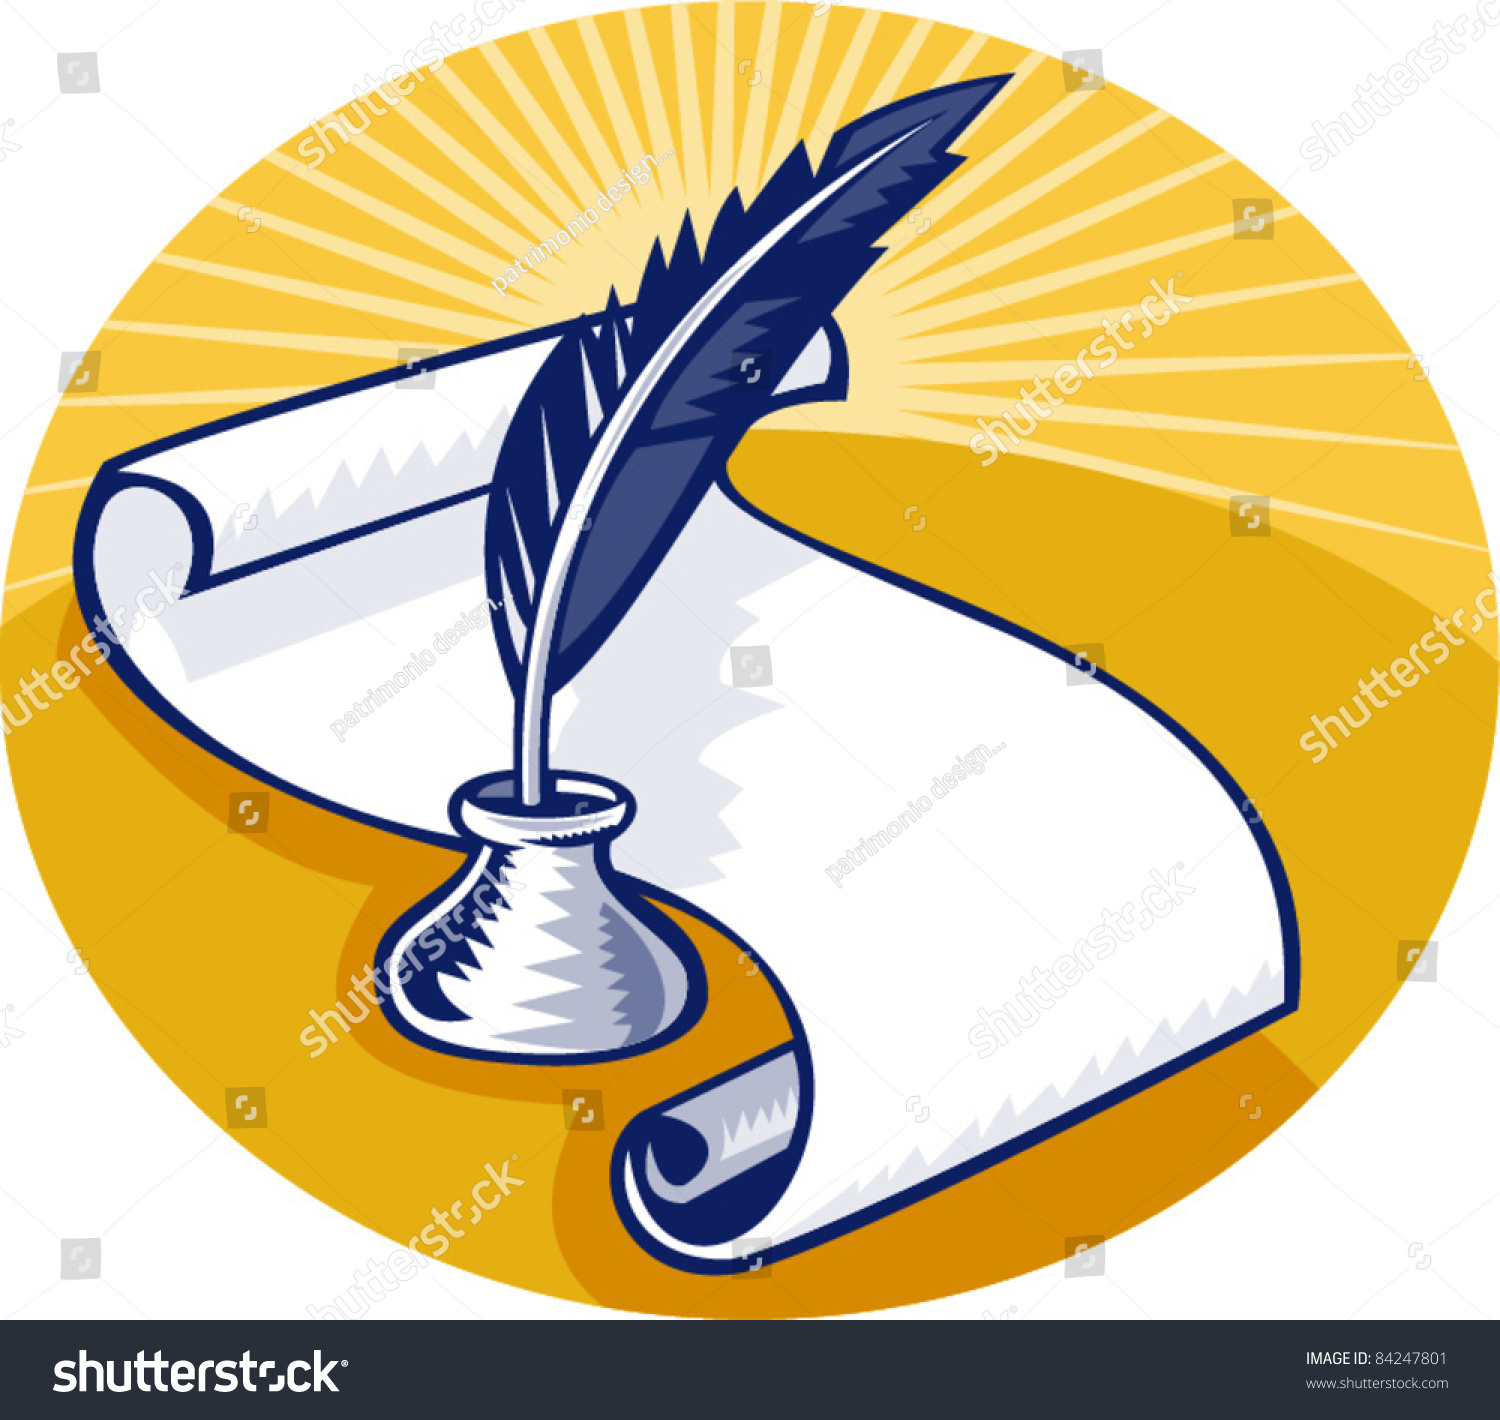 clip art quill and inkwell - photo #41